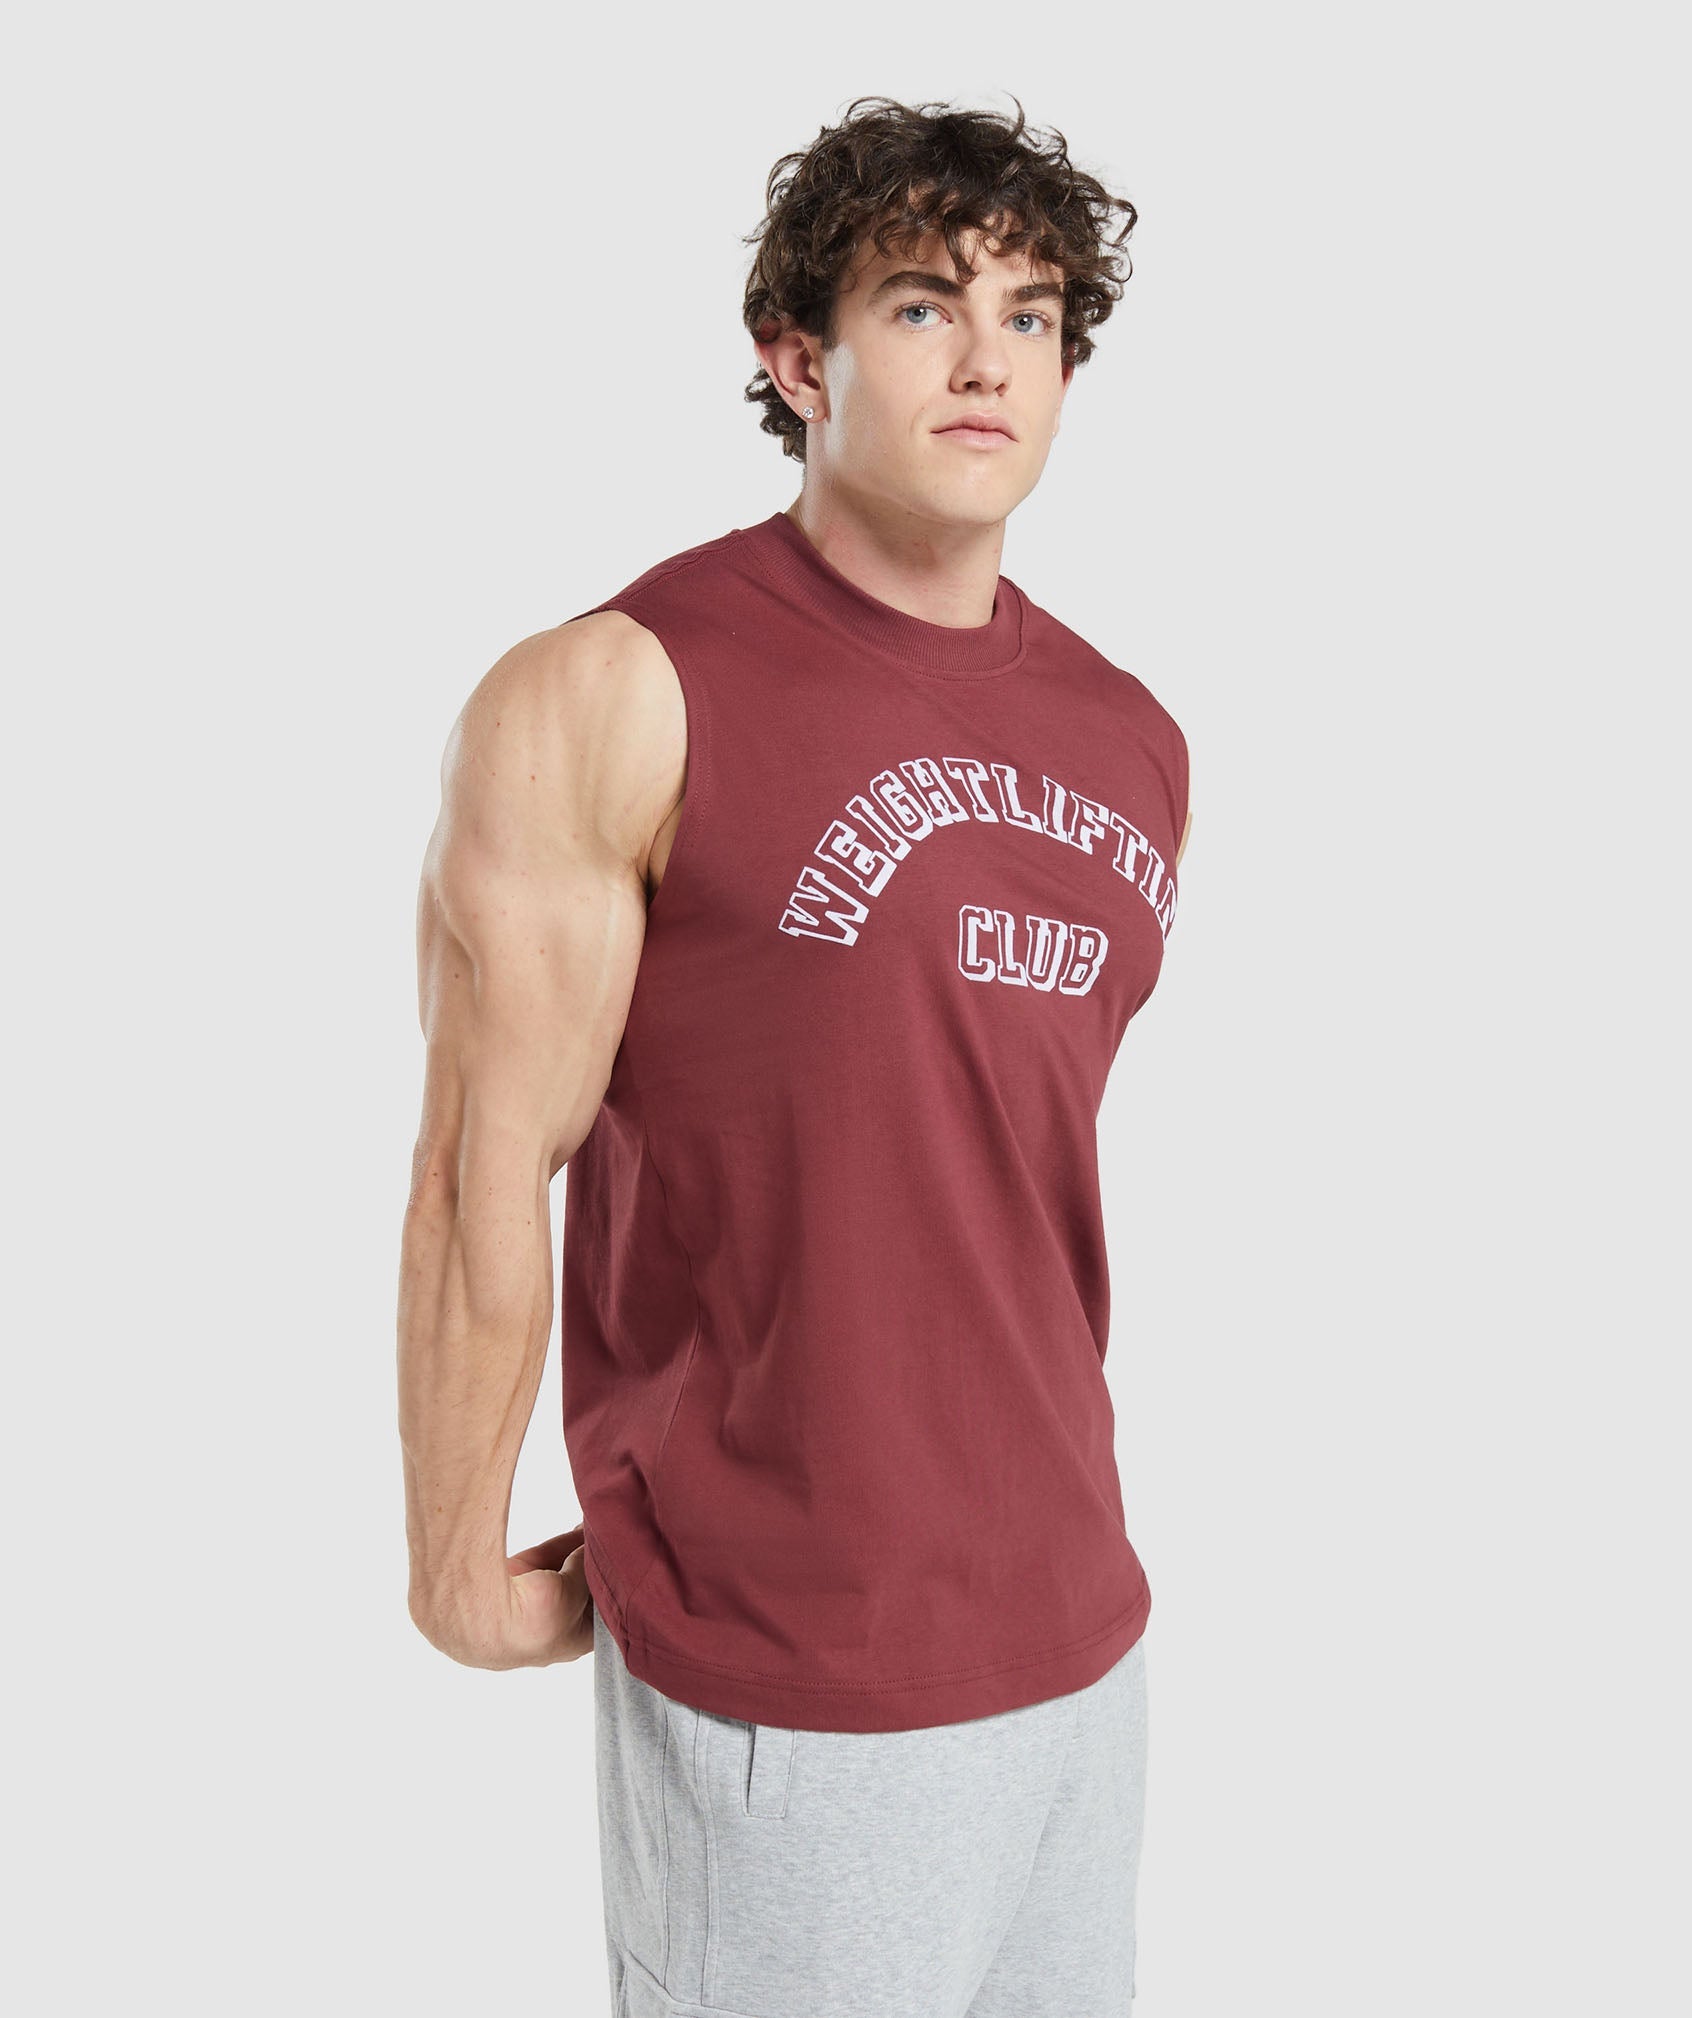 Weightlifting Club Tank in Washed Burgundy - view 3